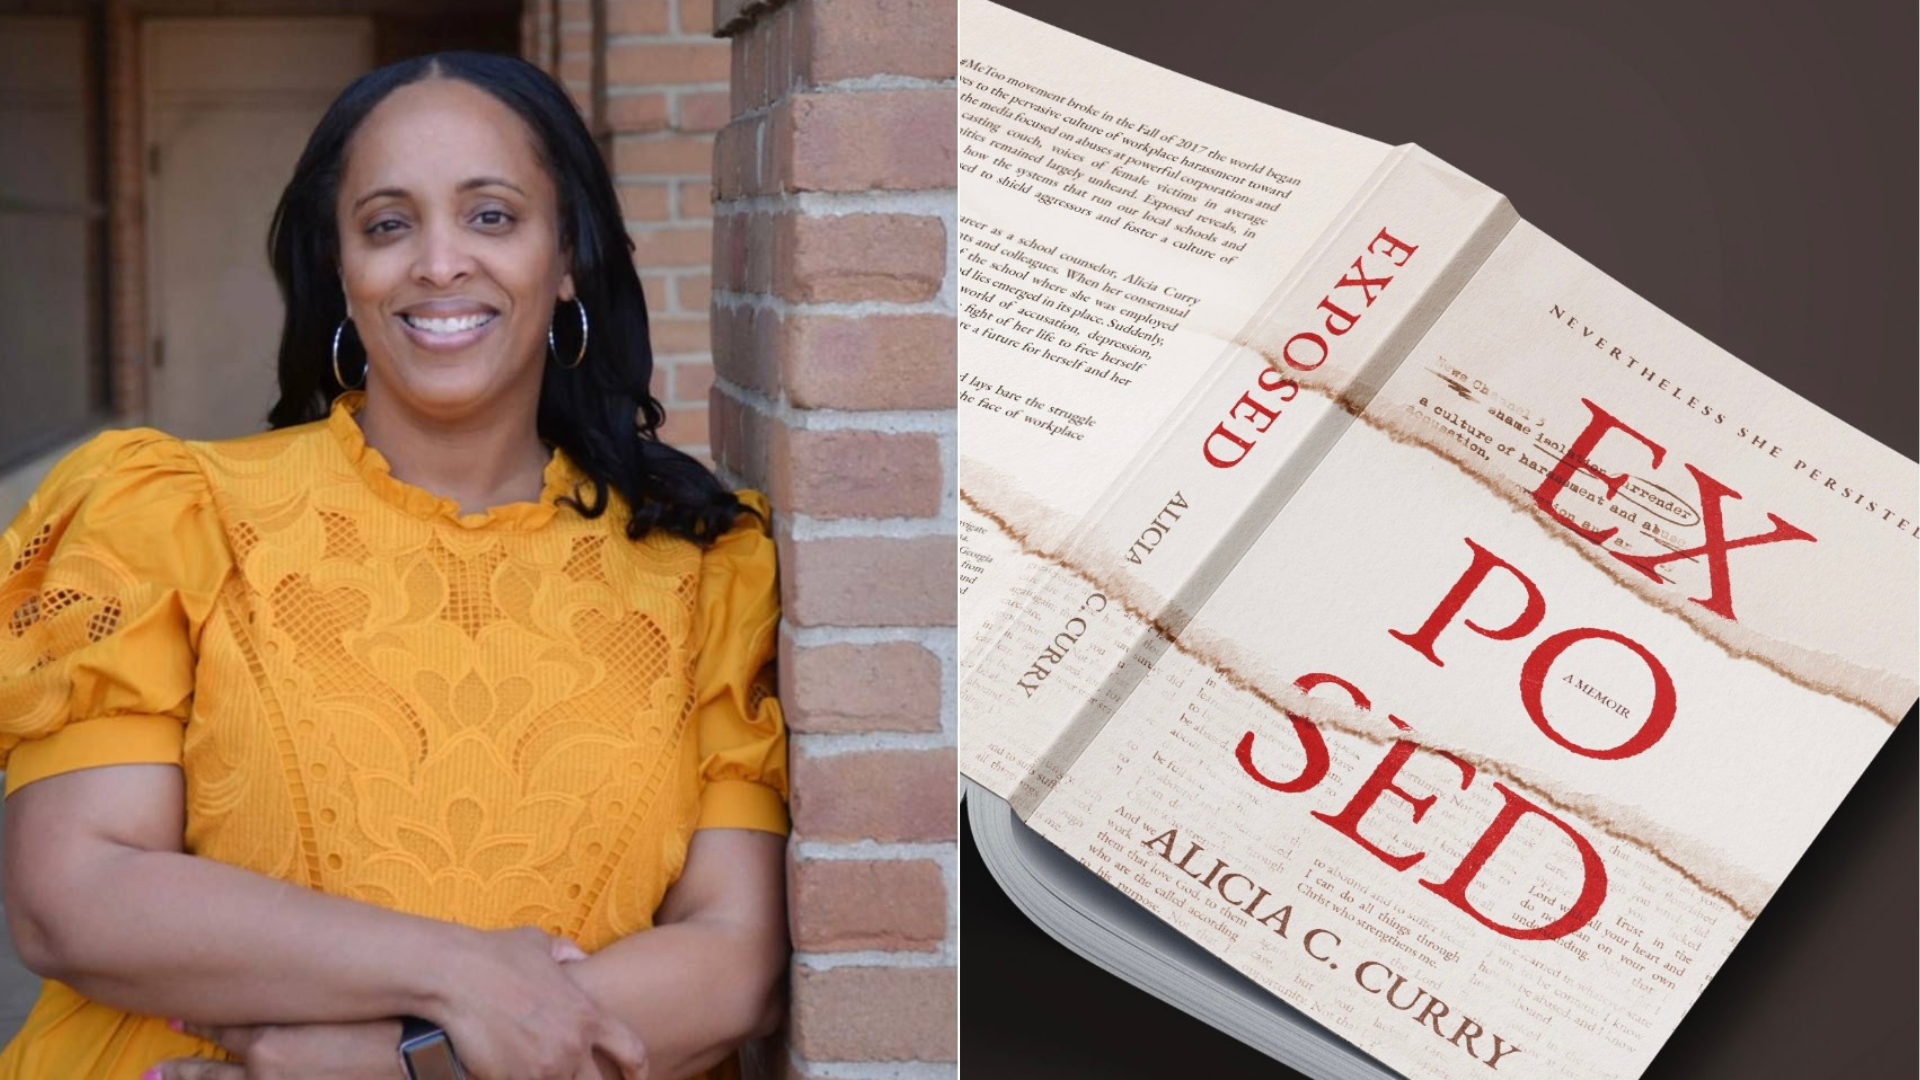                      Meet The Therapist & Author On A Mission To Help The Black Community Heal                             
                     